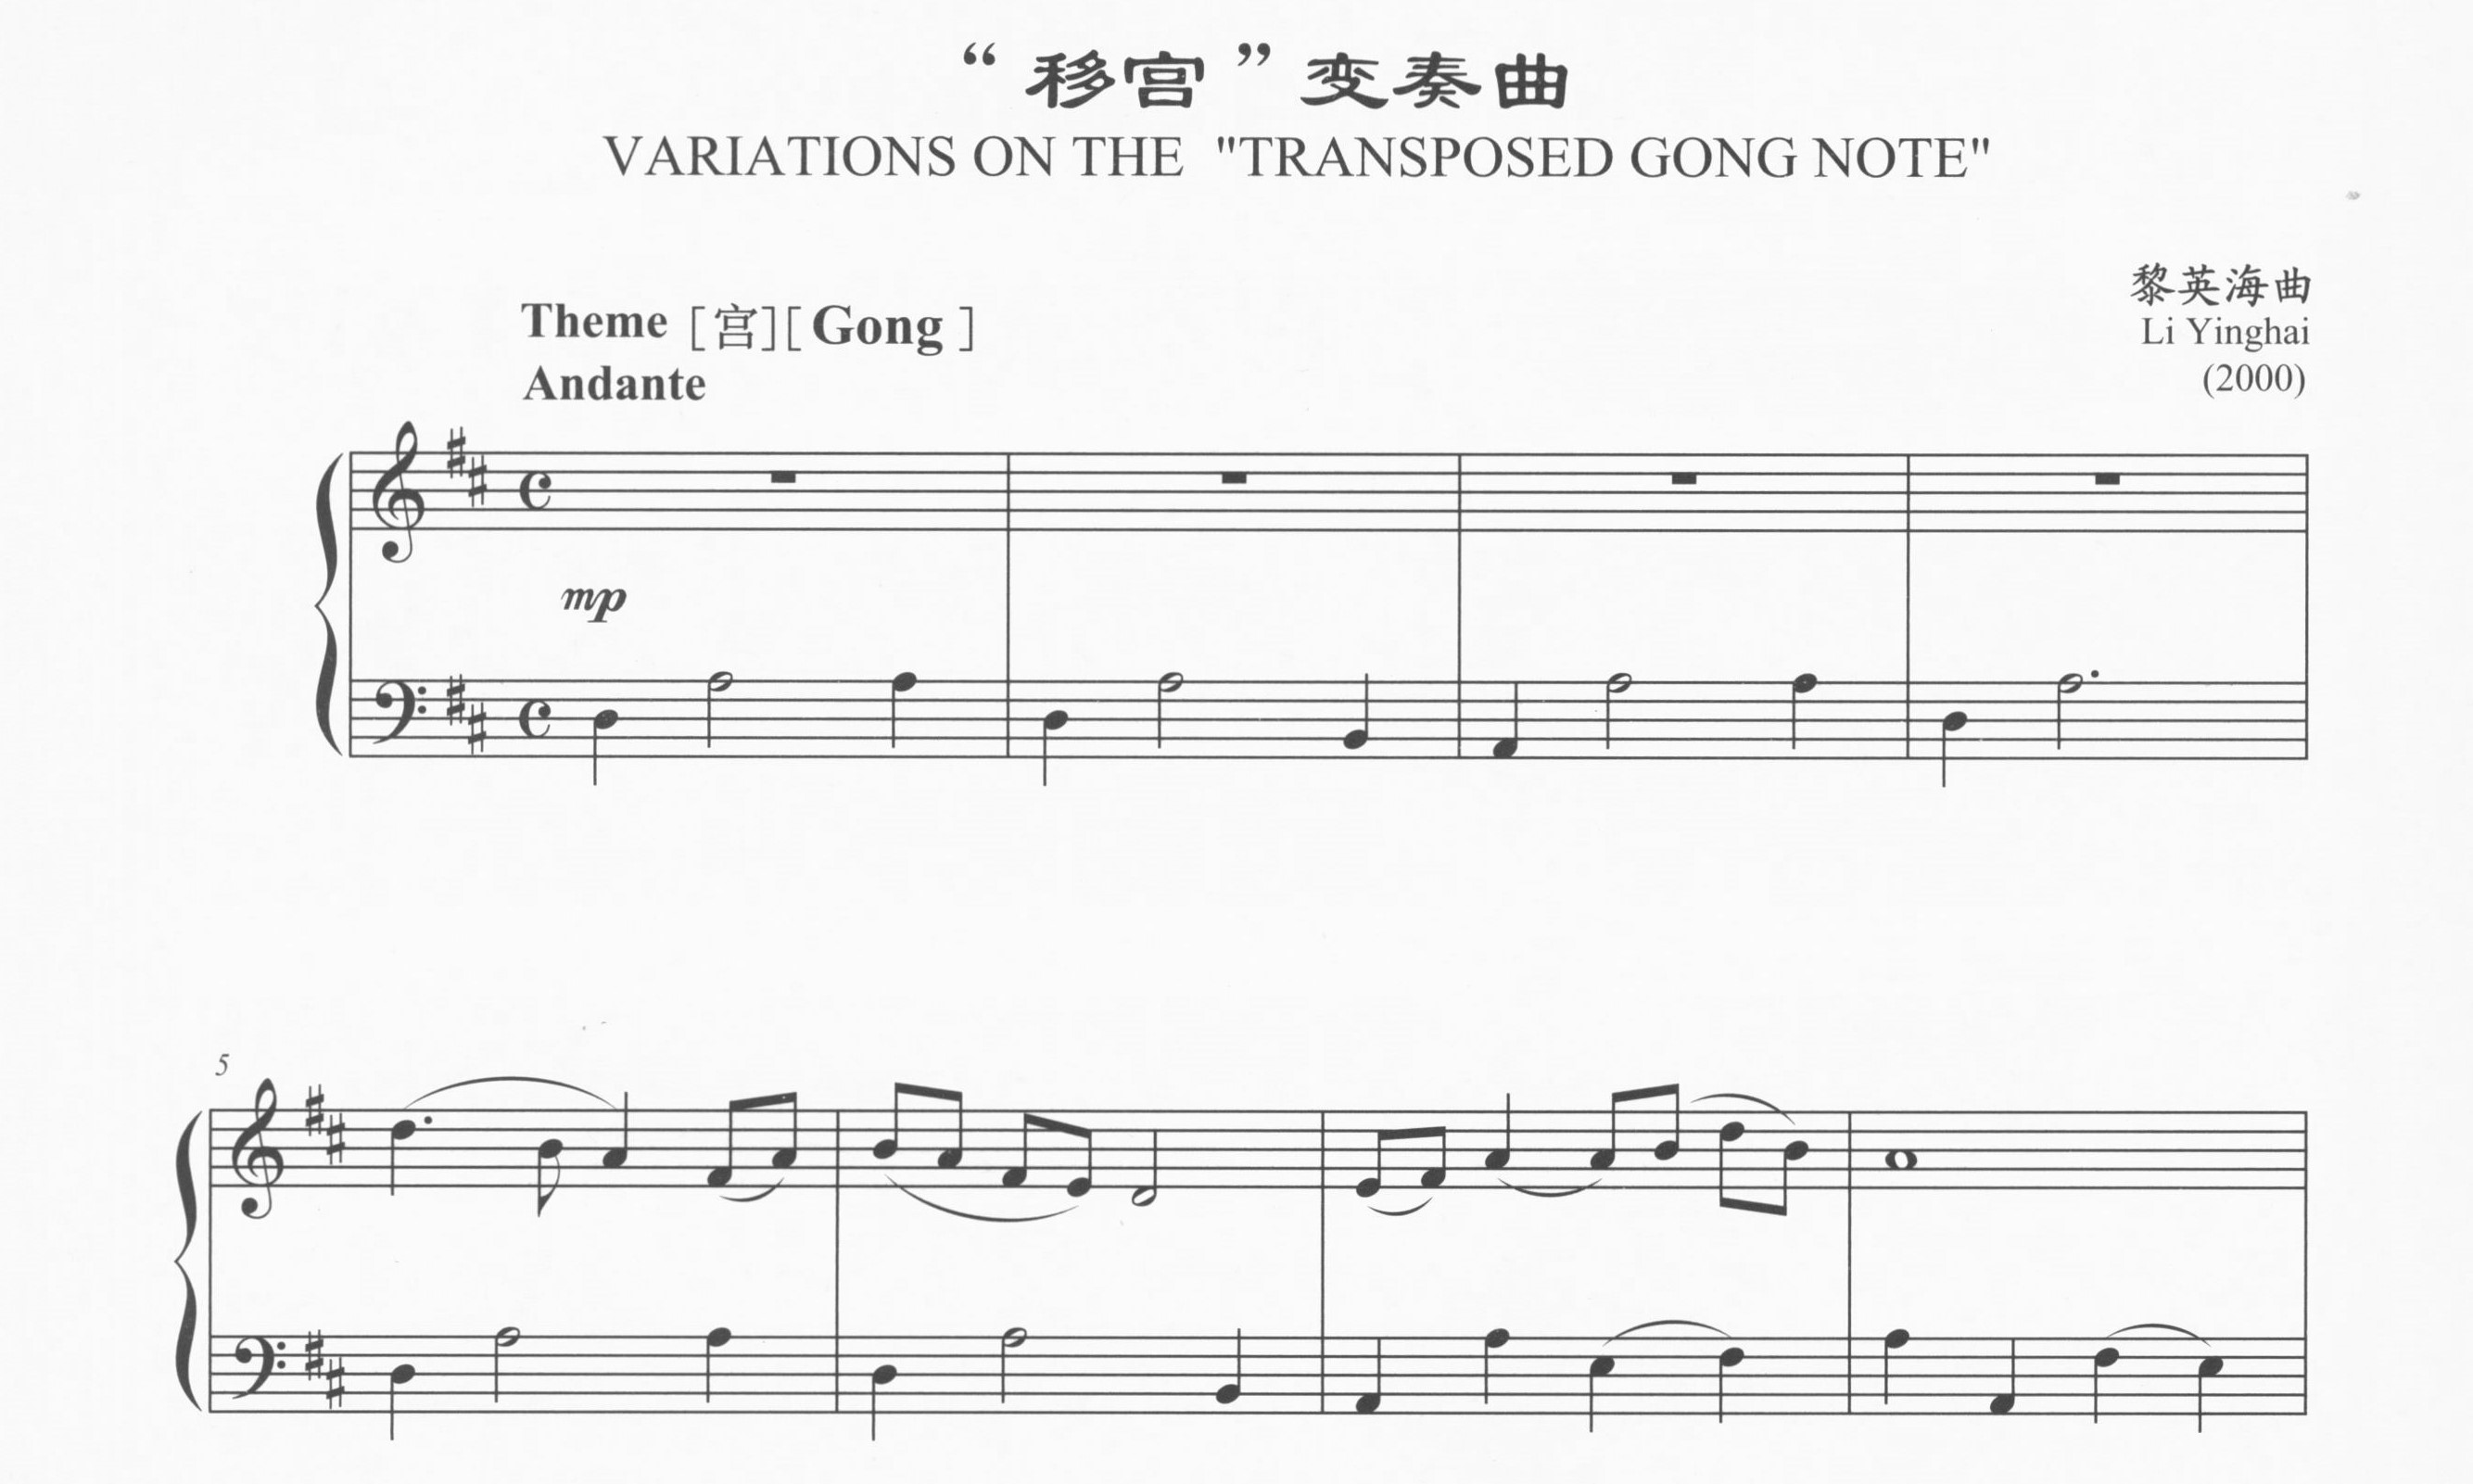 Variations on the "Transposed Gong Note" - Li Yinghai